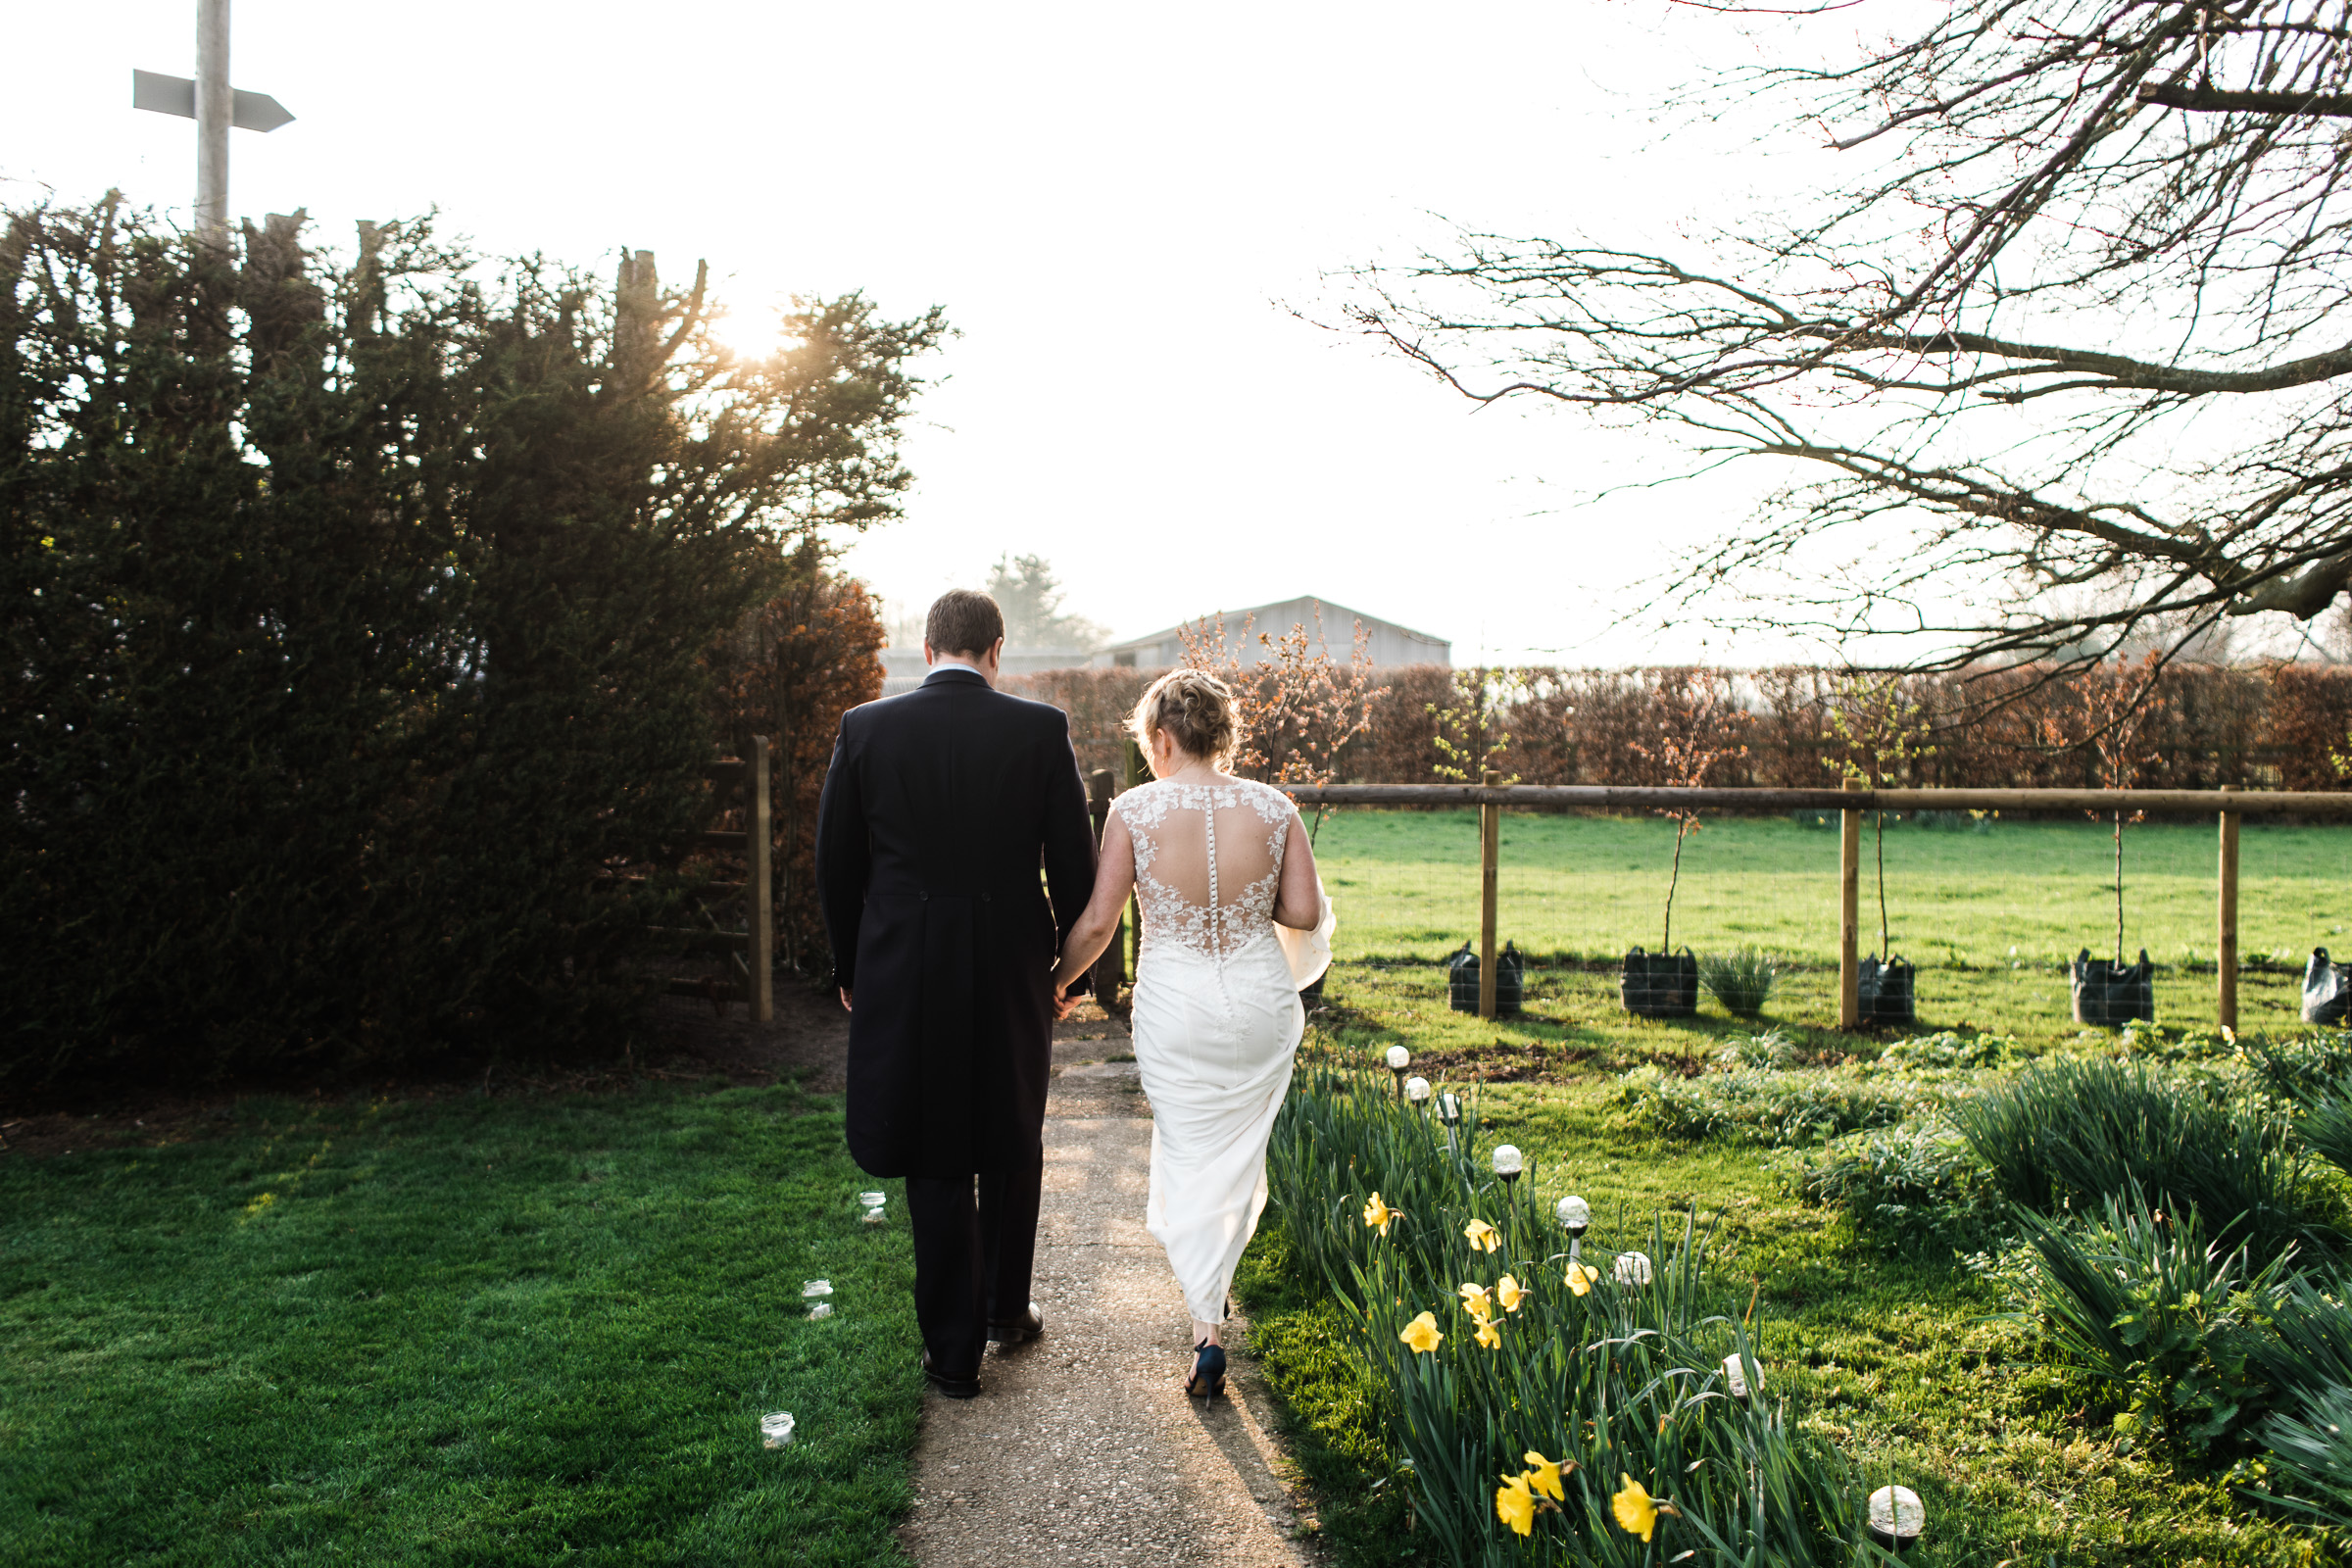 A spring farm wedding in Essex. The bride and groom walk down the path next to some daffodils in the gentle light from a sun low in the sky.